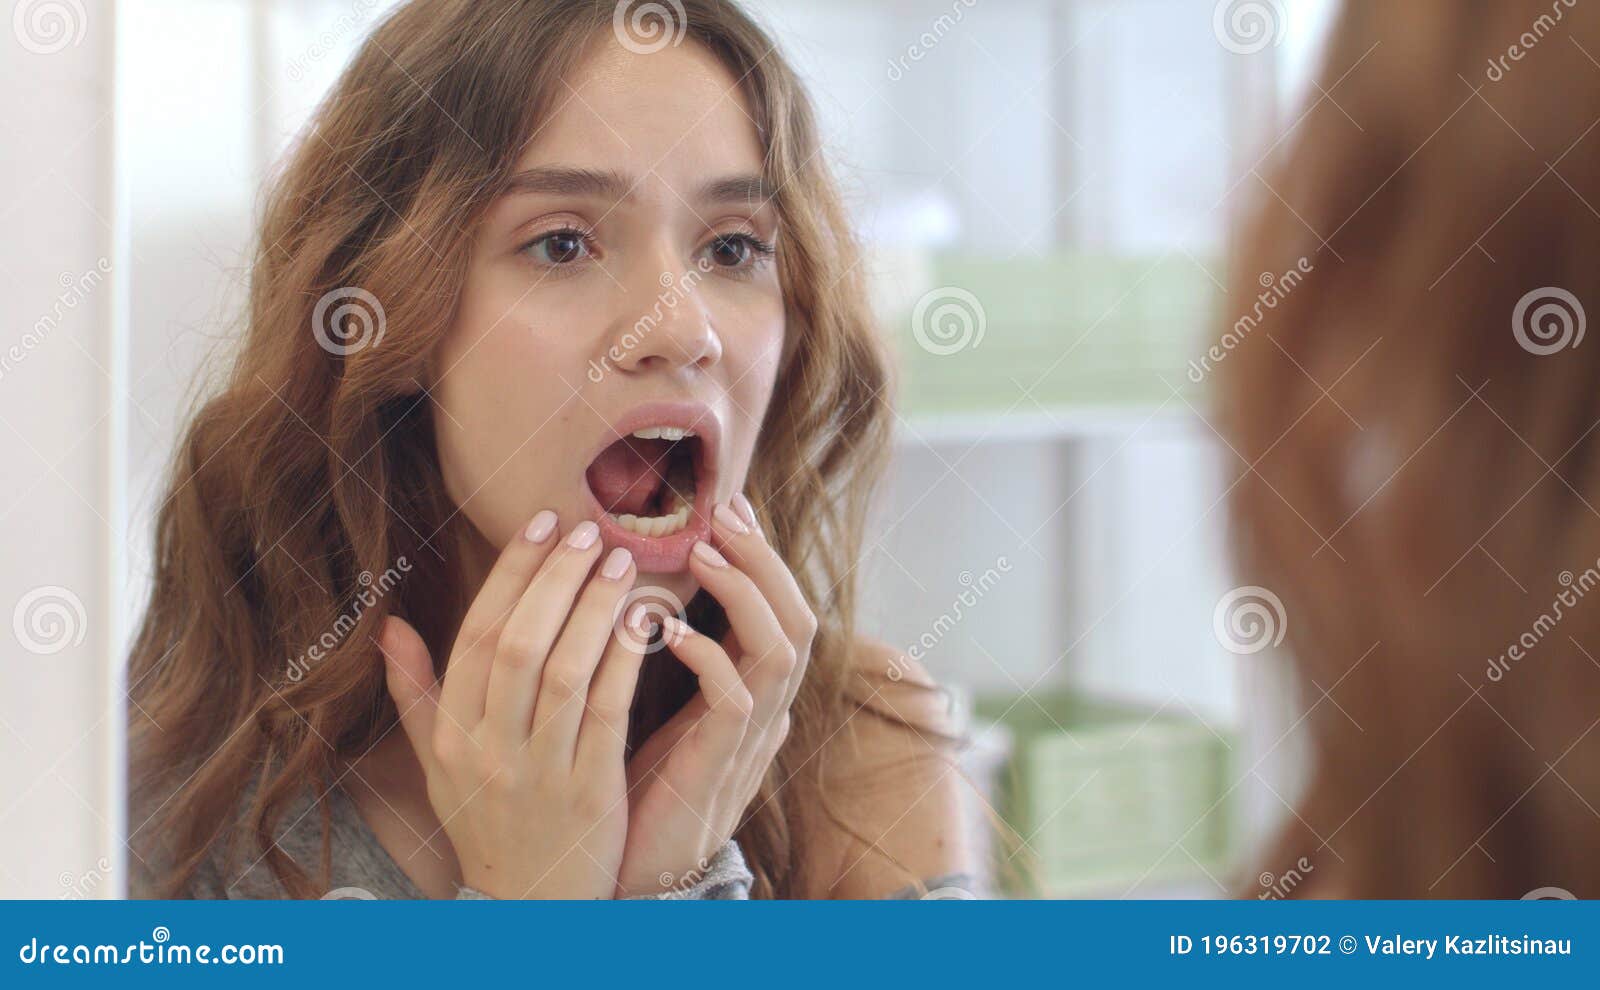 young woman with opened mouth checking teeth in mirror in home bath room